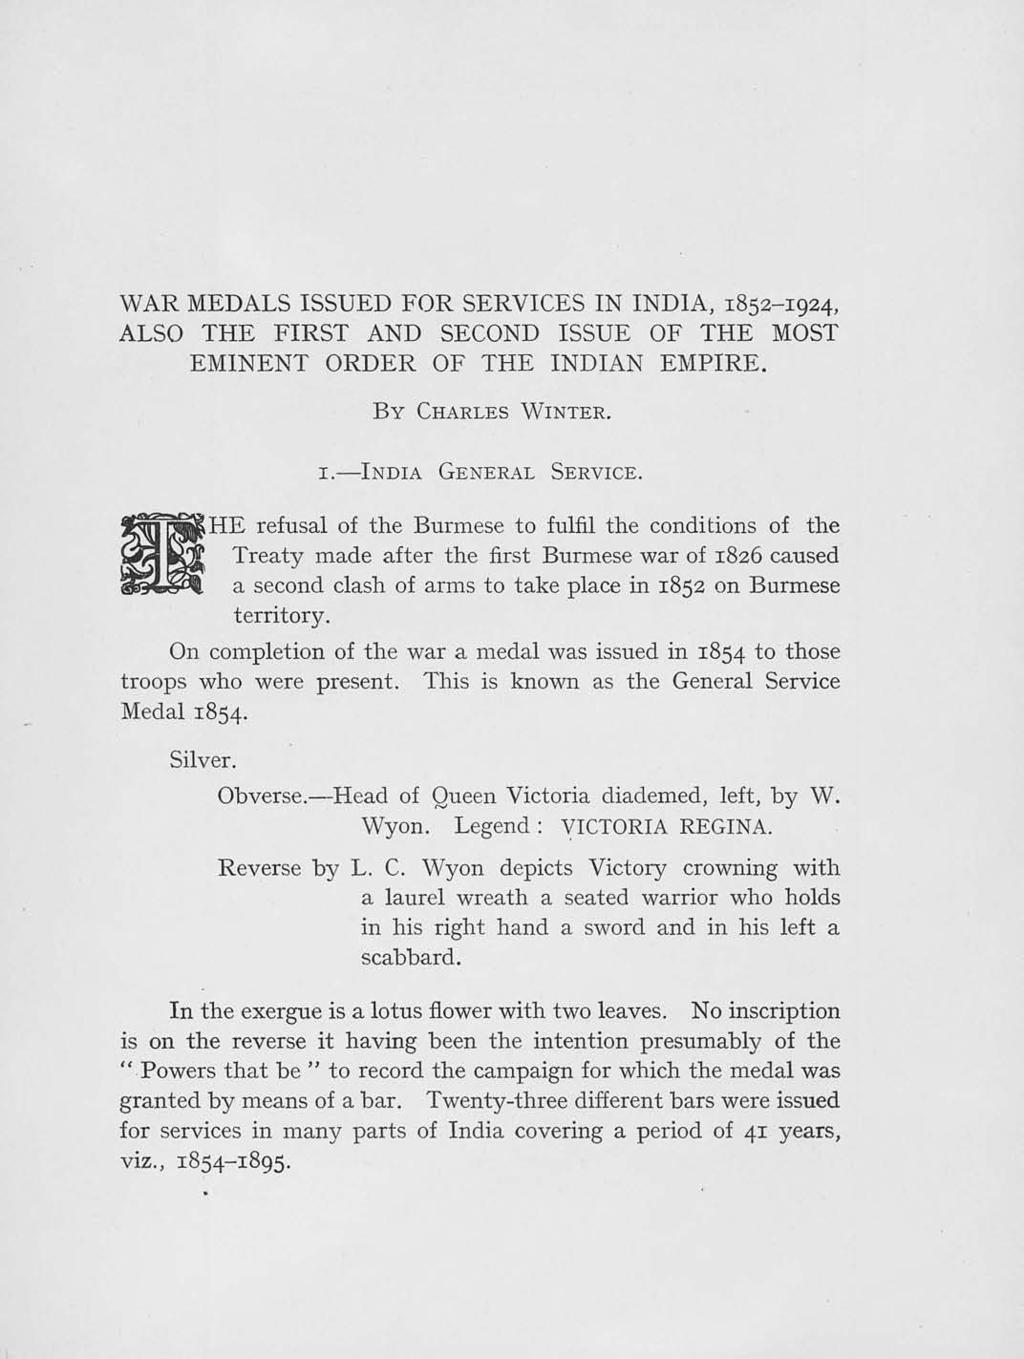 WAR MEDALS ISSUED FOR SERVICES IN INDIA, 1852-1924, ALSO THE FIRST AND SECOND ISSUE OF THE MOST EMINENT ORDER OF THE INDIAN EMPIRE. By CHARLES VVINTER. I.-INDIA GENERAL SERVICE.